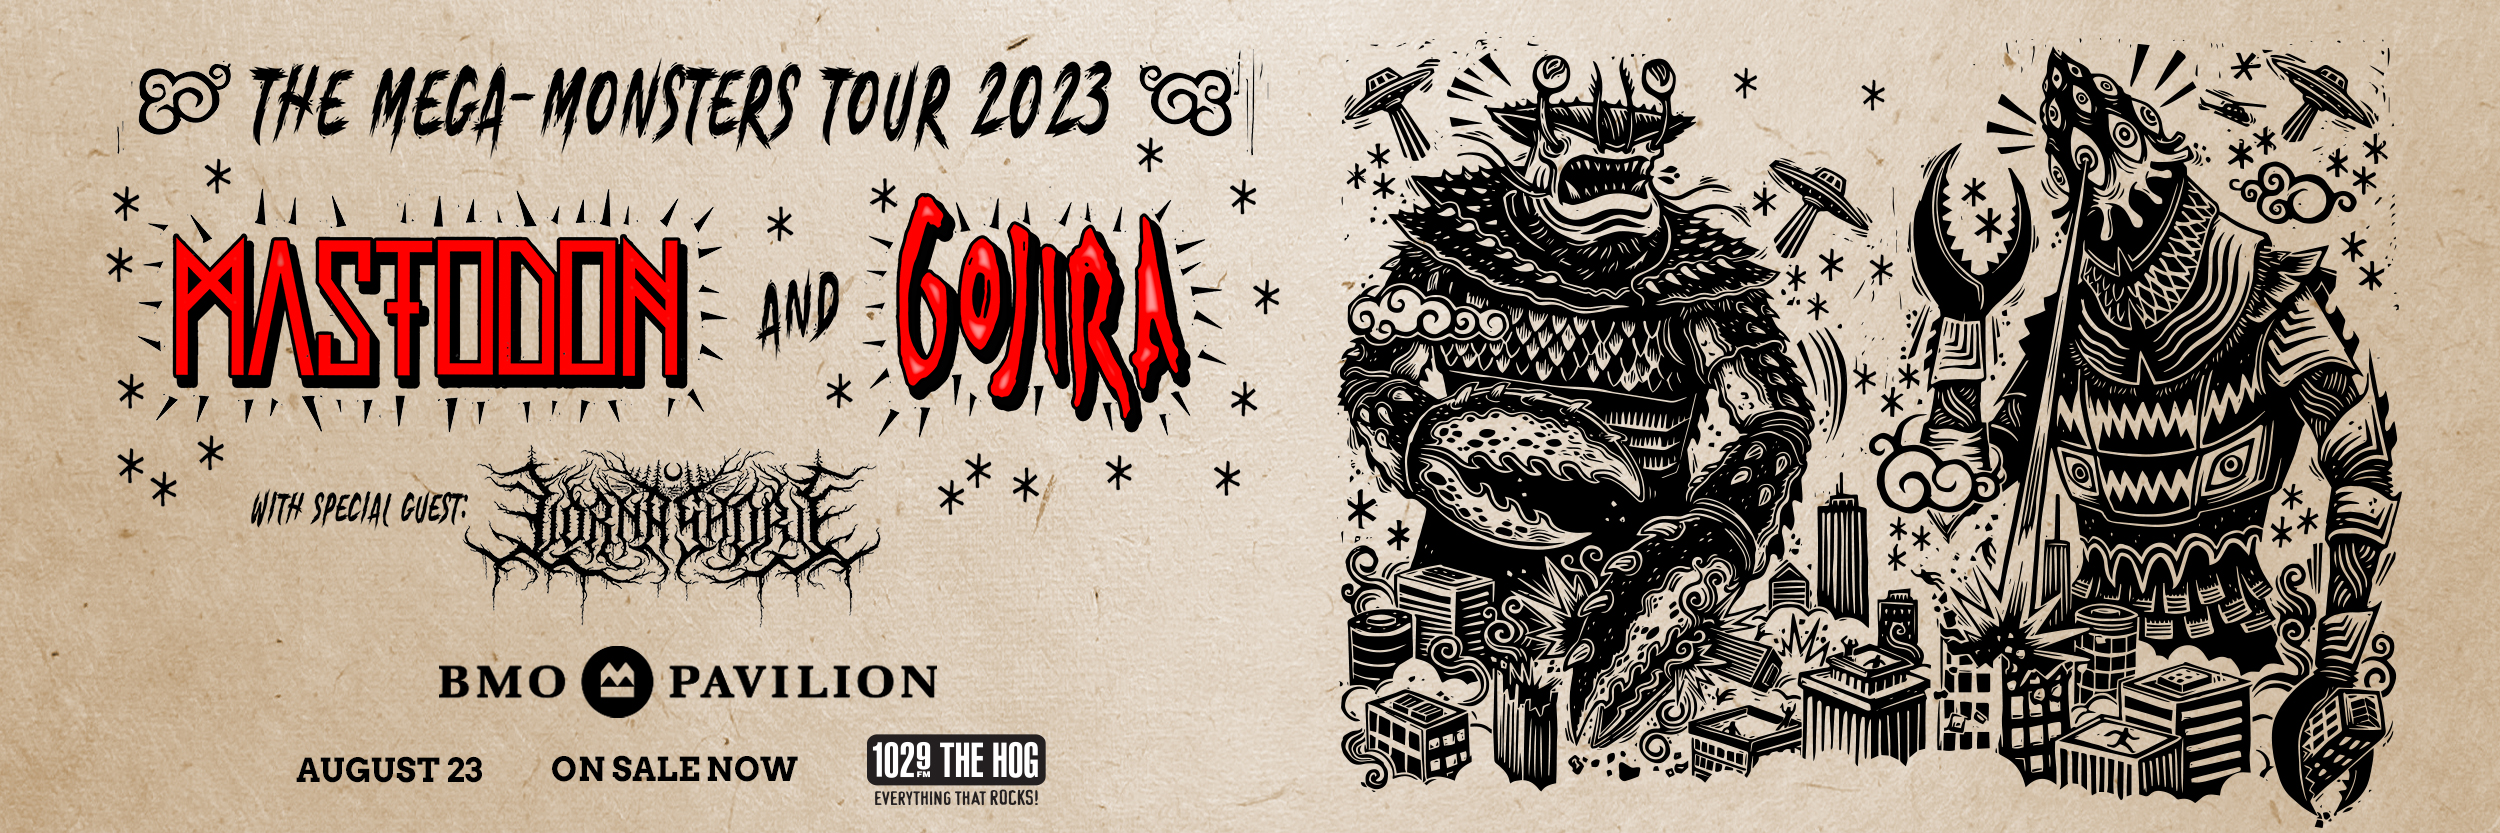 The Mega-Monsters Tour: Mastodon and Gojira with special guest Lorna Shore on August 23